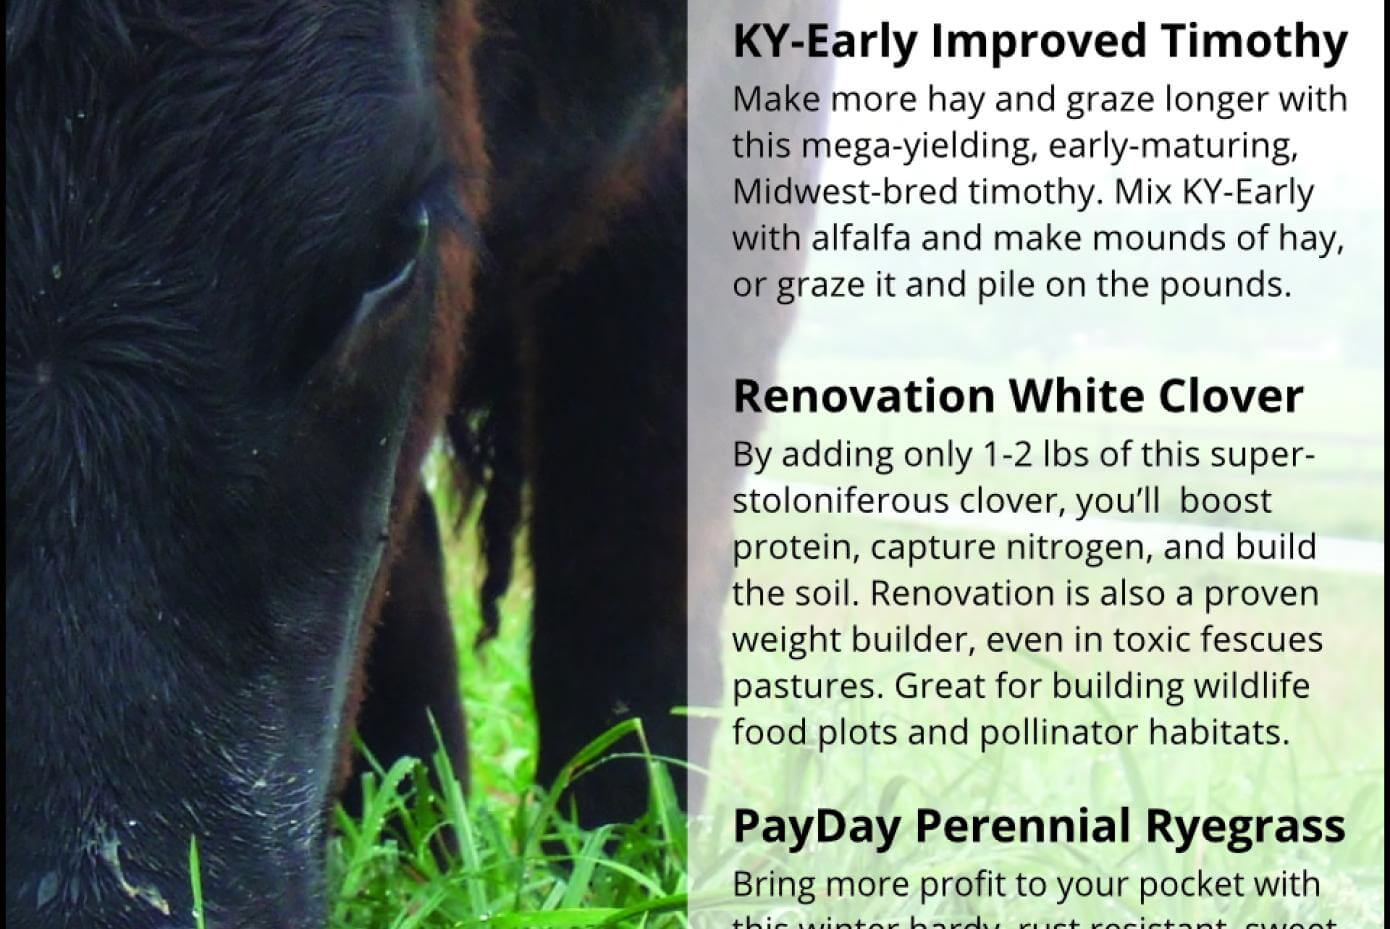 advertisment for KY-Early, Renovation and Payday